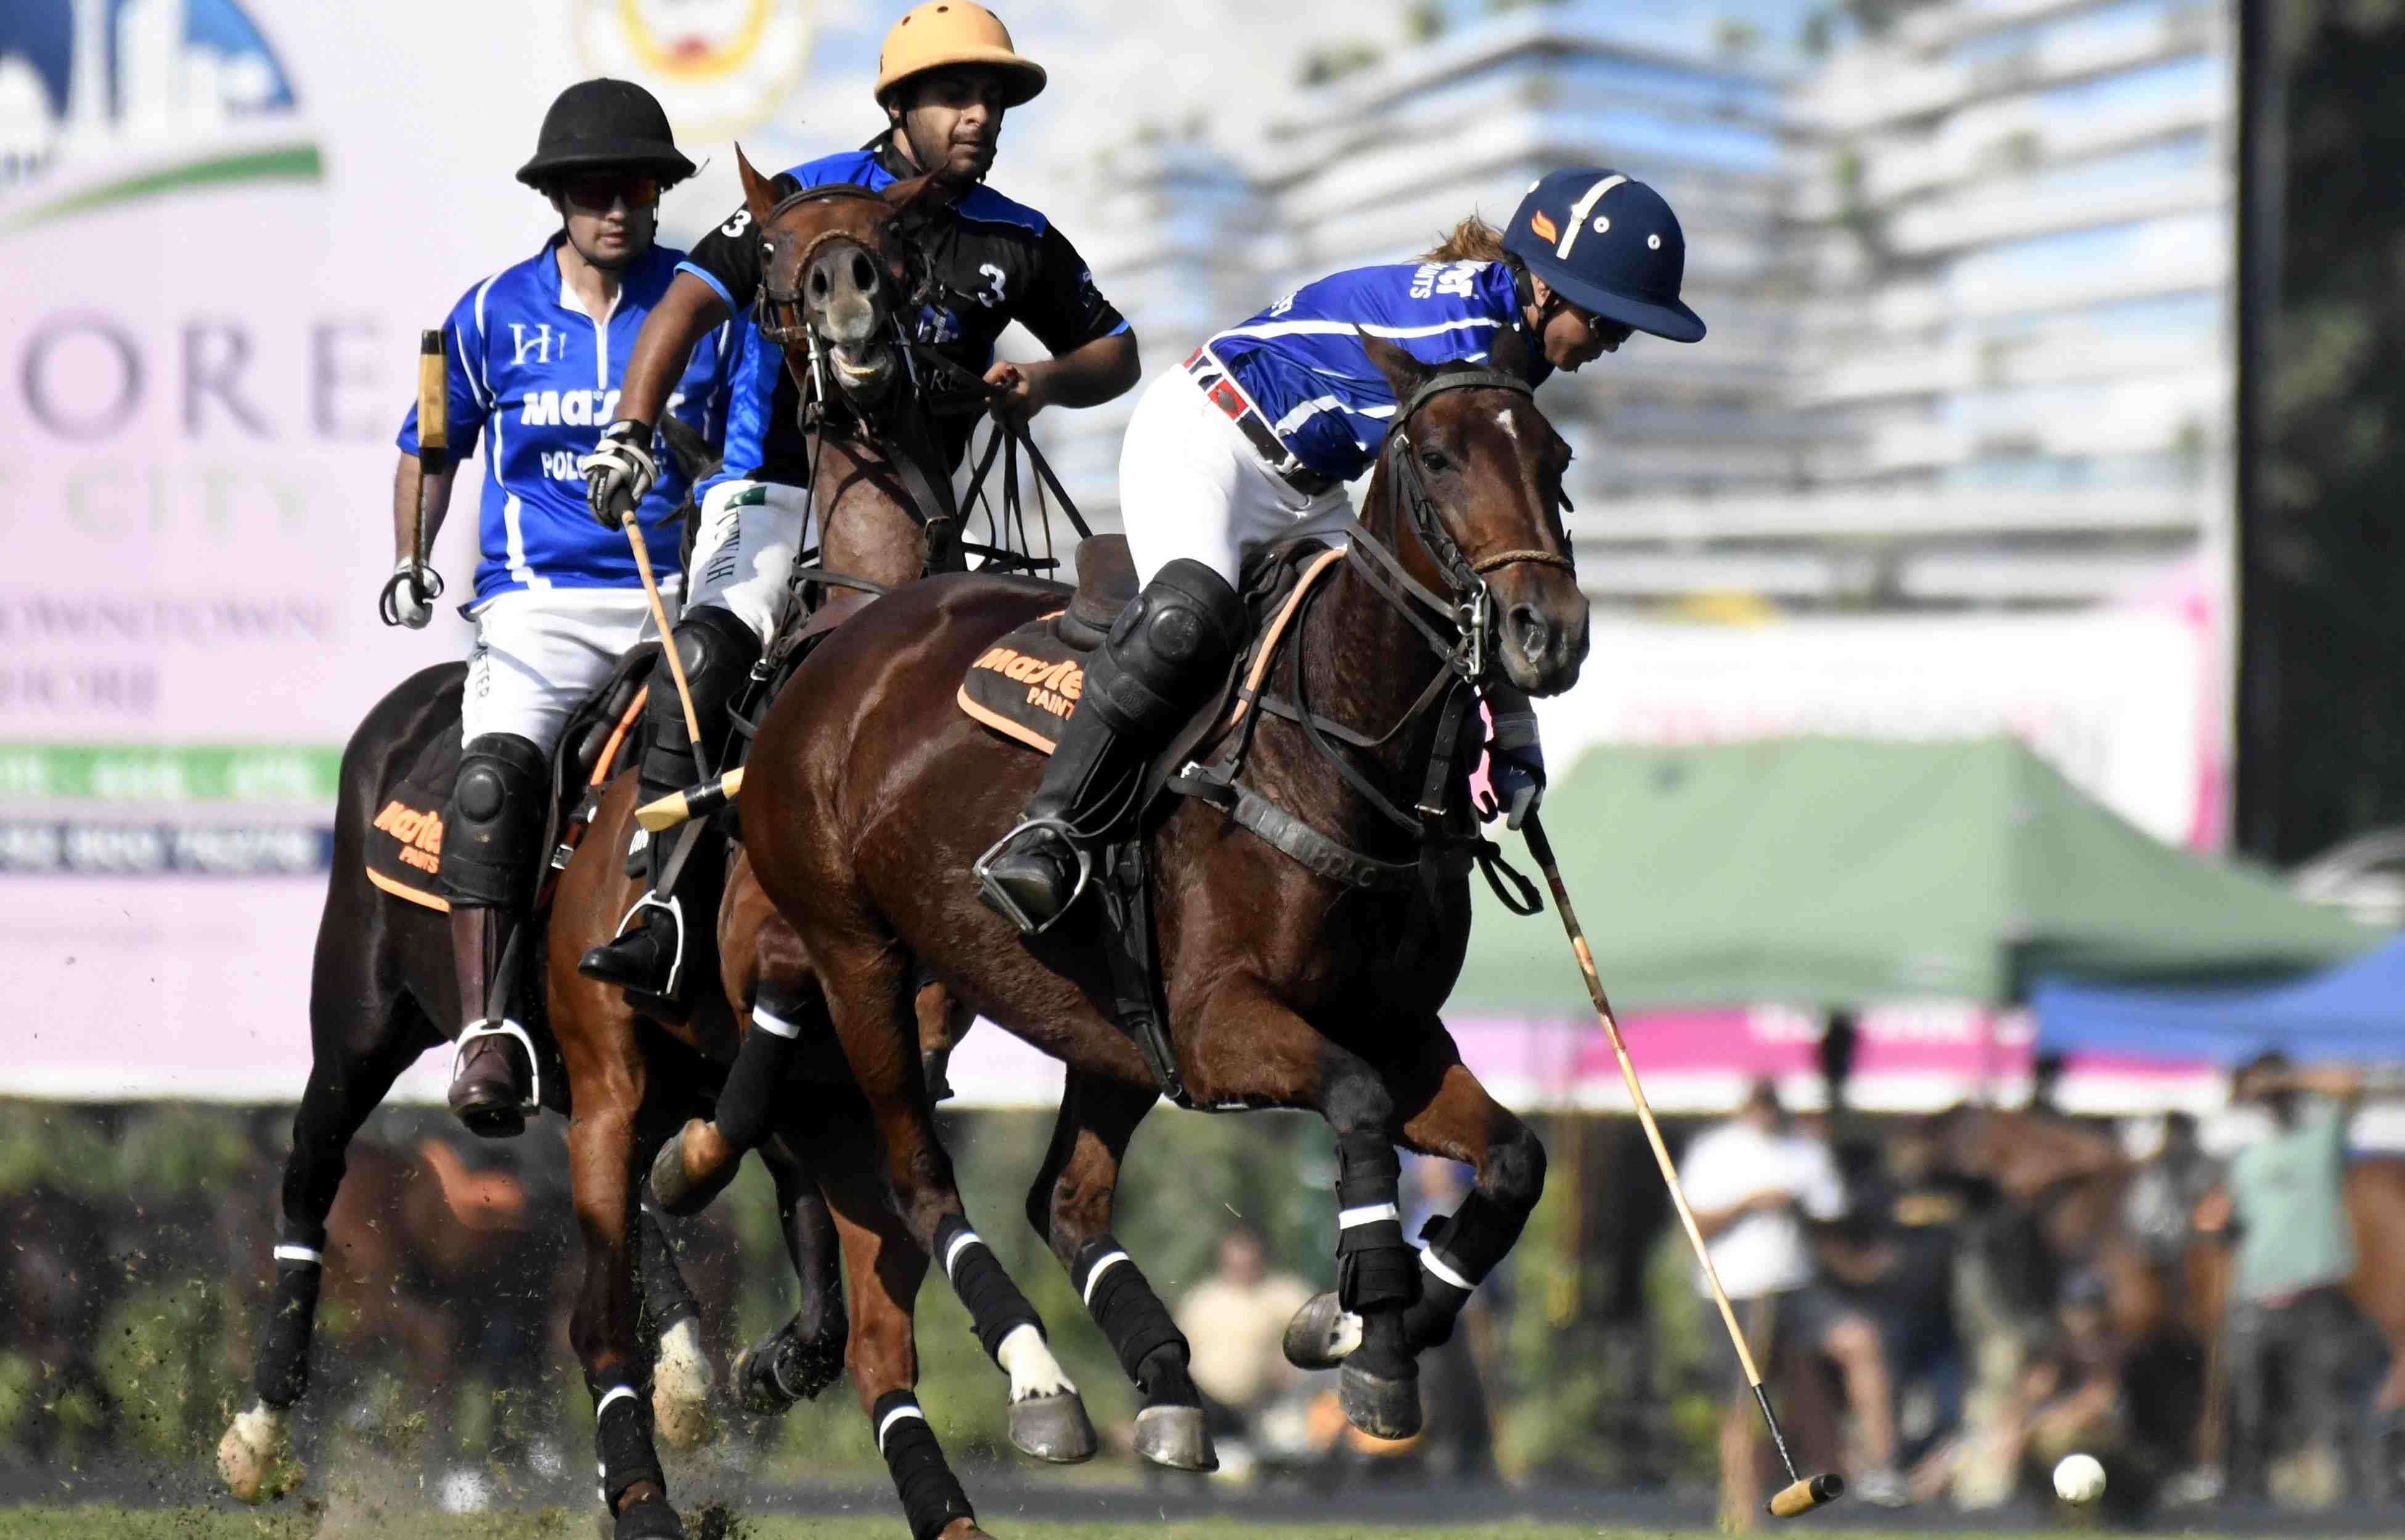 Lahore Smart City Polo in Pink Tournament: Day 3 decides 4 matches